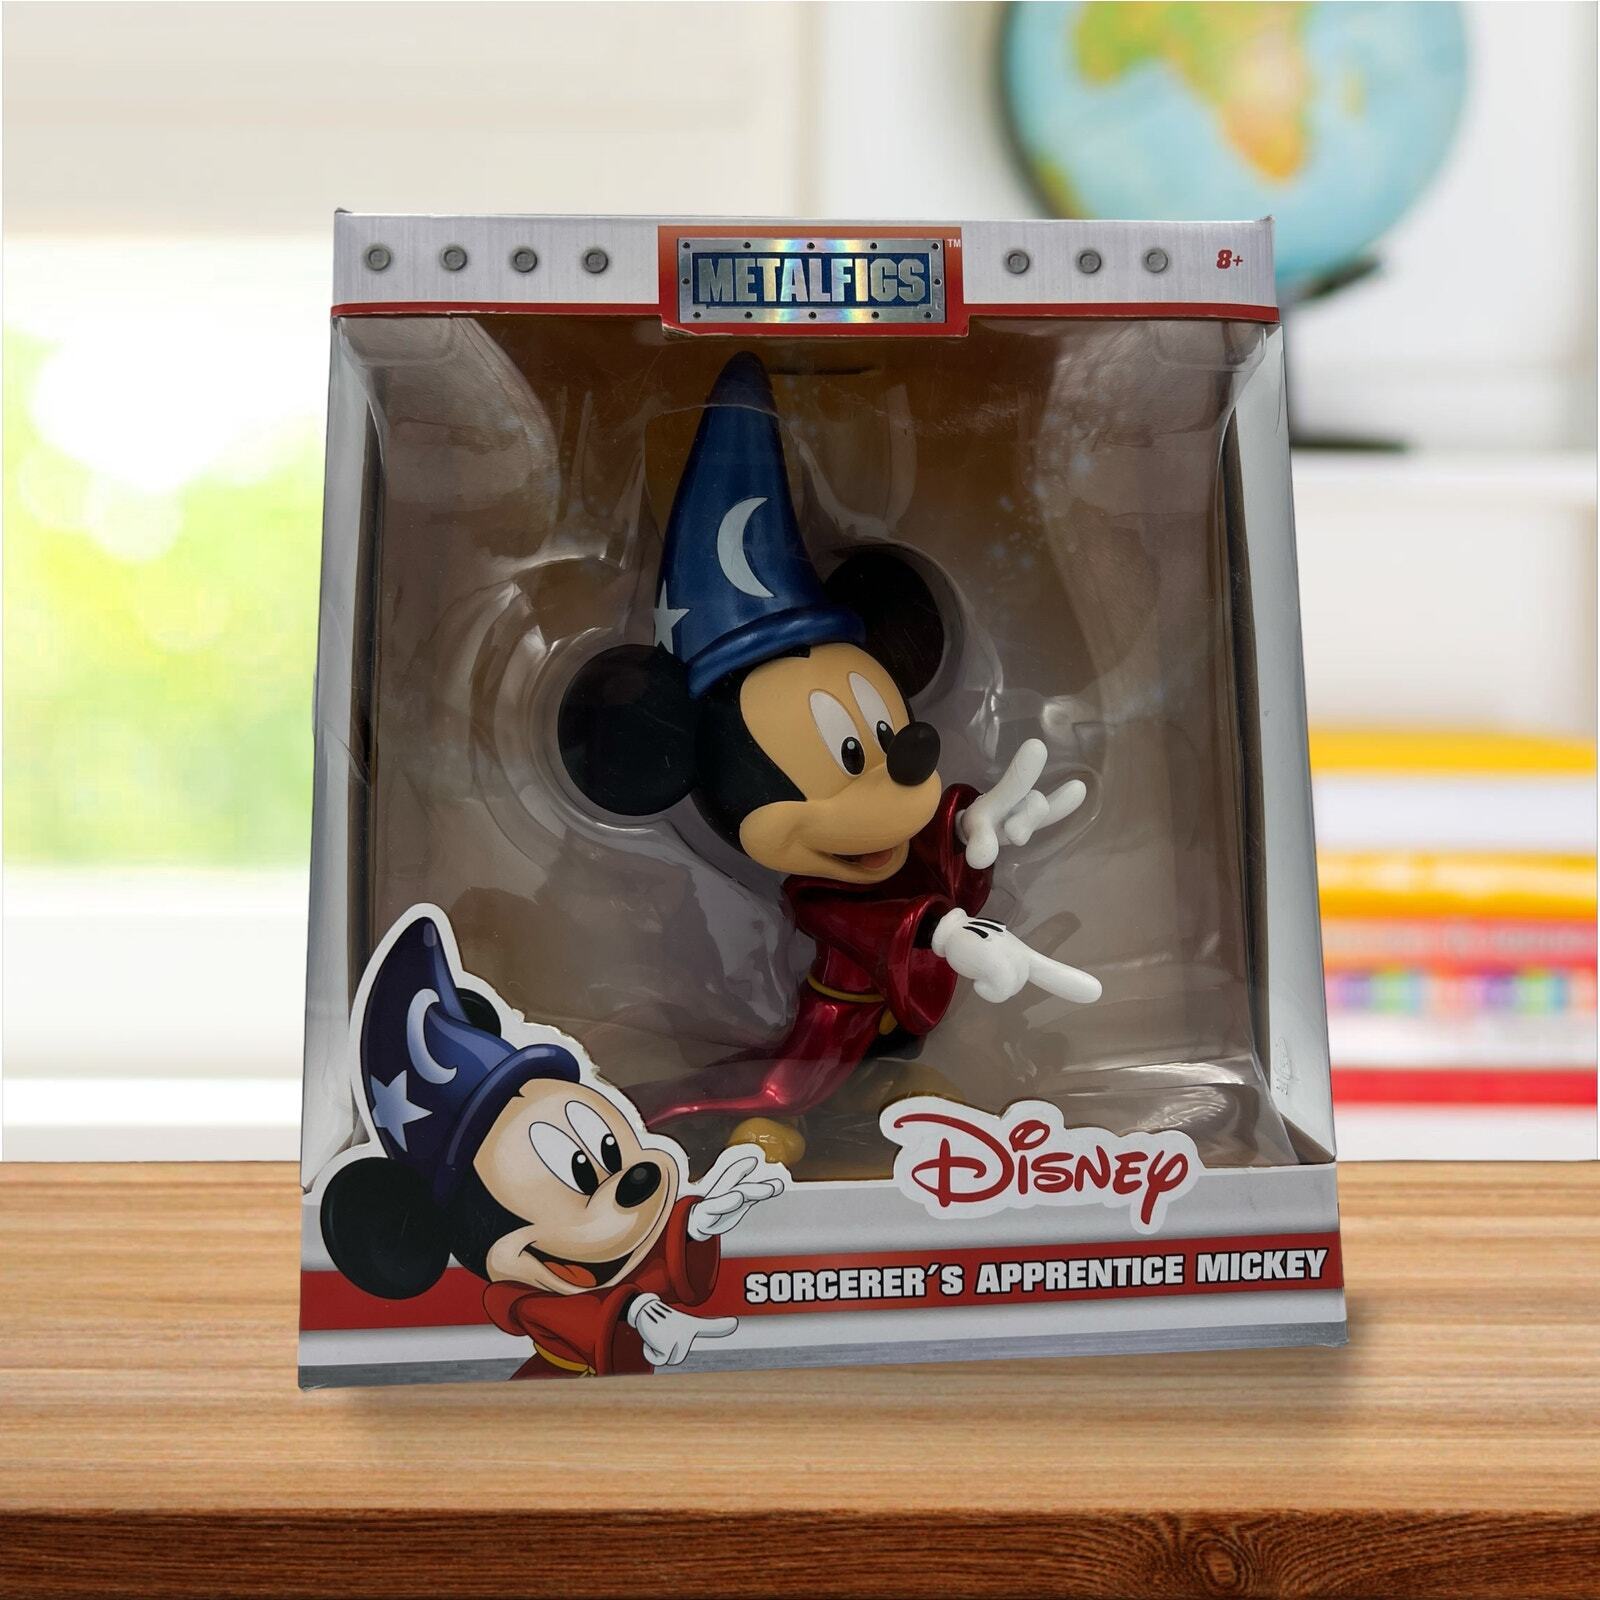 Disney Sorcerer’s Apprentice Mickey Mouse 6” Die-Cast Metalfigs Limited Edition